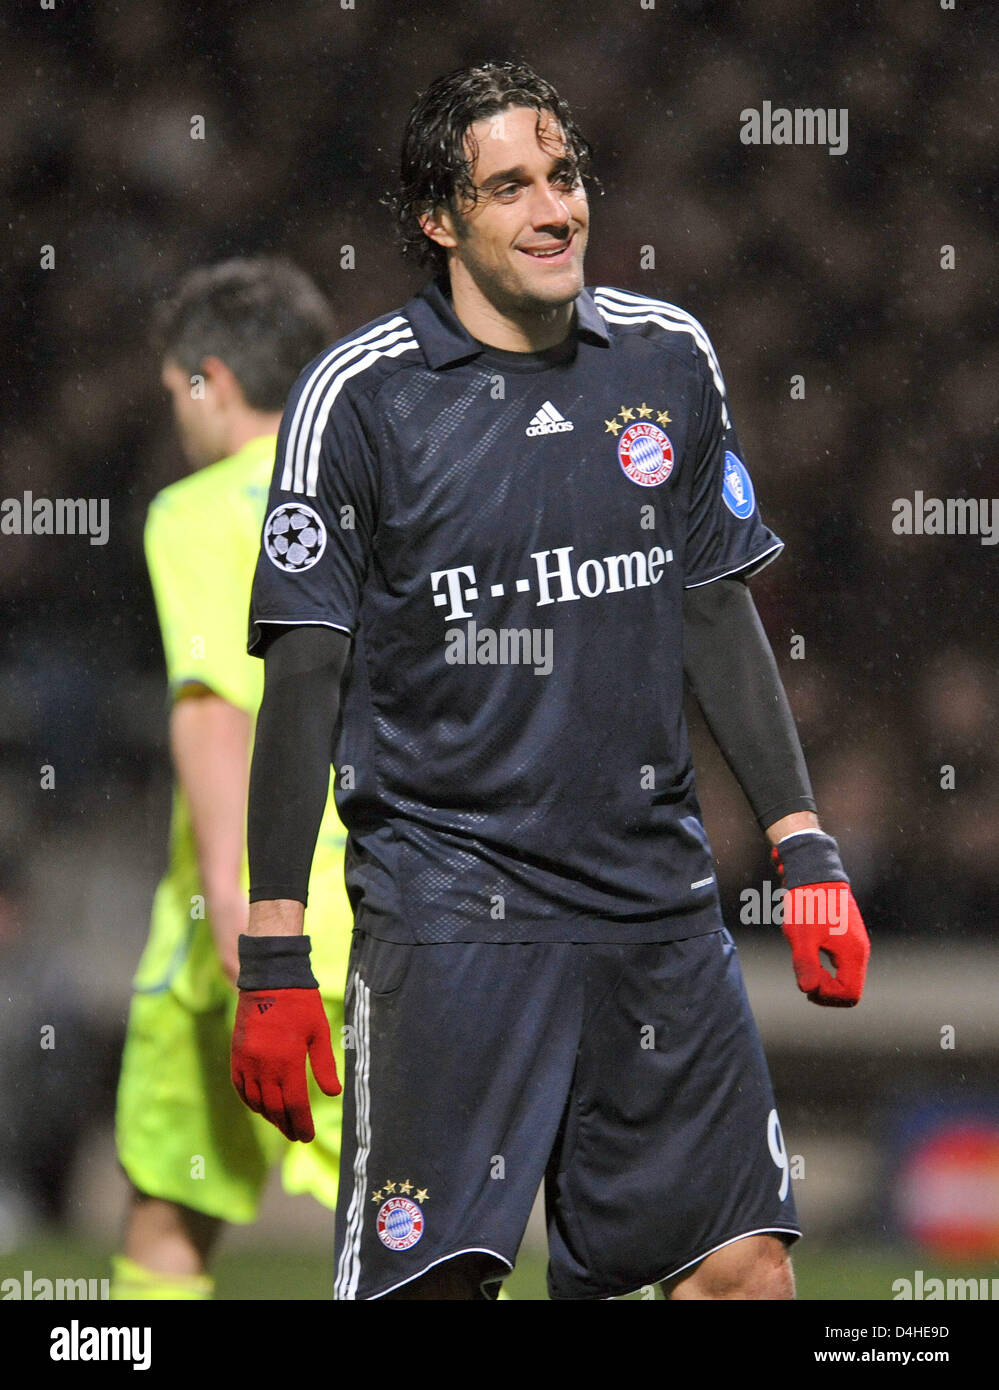 Munich?s Luca Toni smiles in the Champions League Group F match Olympique Lyonnaise v FC Bayern Munich at Stade de Gerland in Lyon, France, 10 December 2008. German Bundesliga side Munich defeated French Ligue 1 side Lyon 3-2 securing the first place in UEFA Champions League Group F. Photo: Andreas Gebert Stock Photo